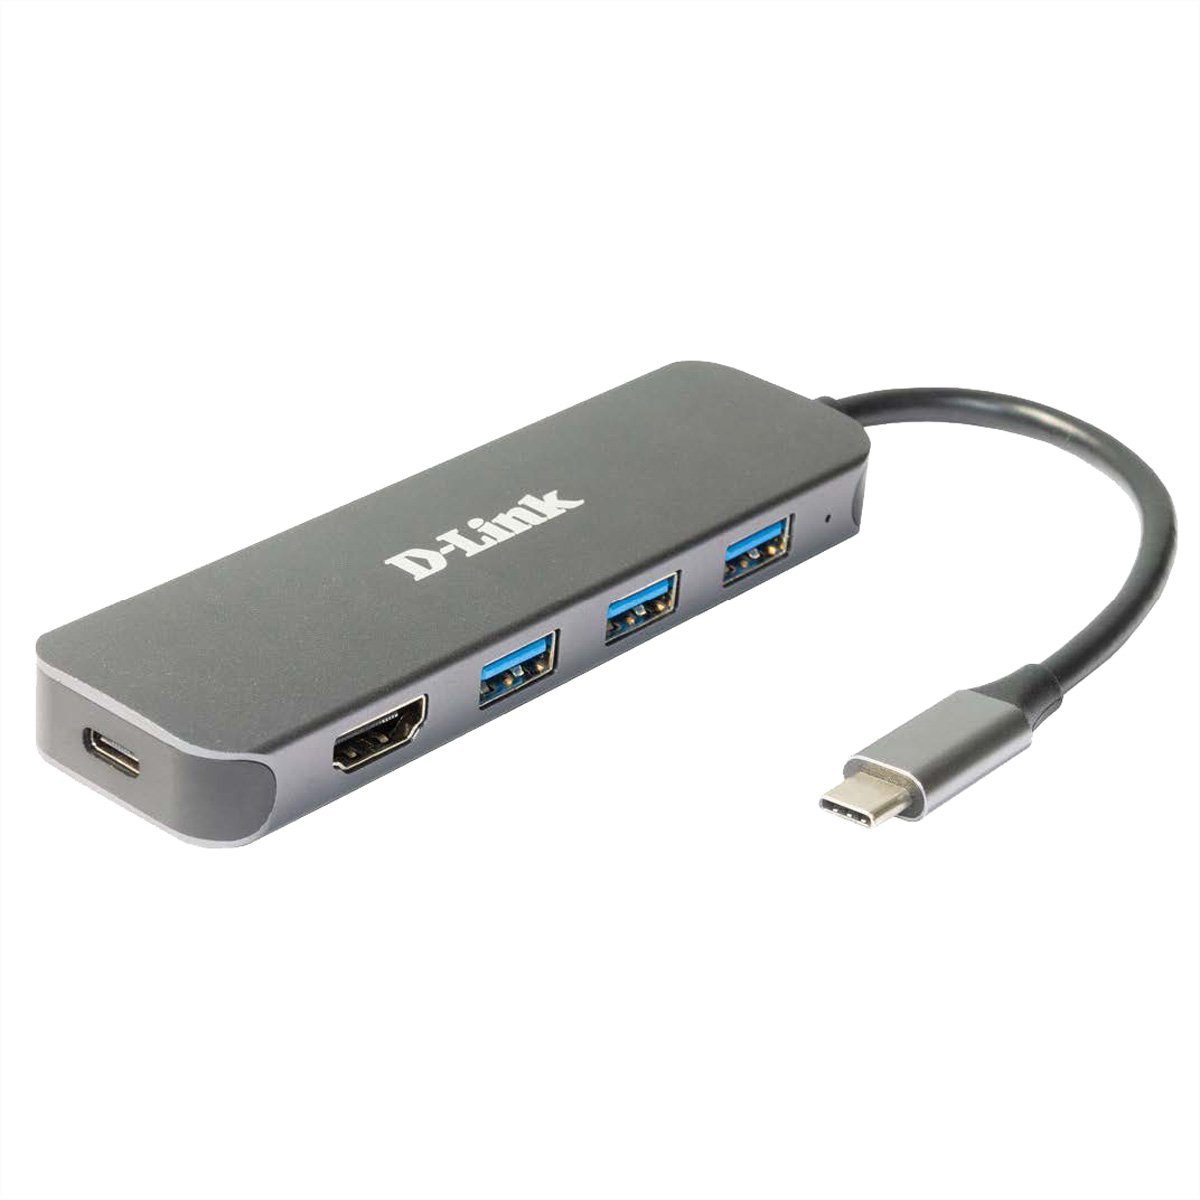 D-Link DUB-2333 5-in-1 mit USB-C HDMI/Power Hub Delivery Computer-Adapter